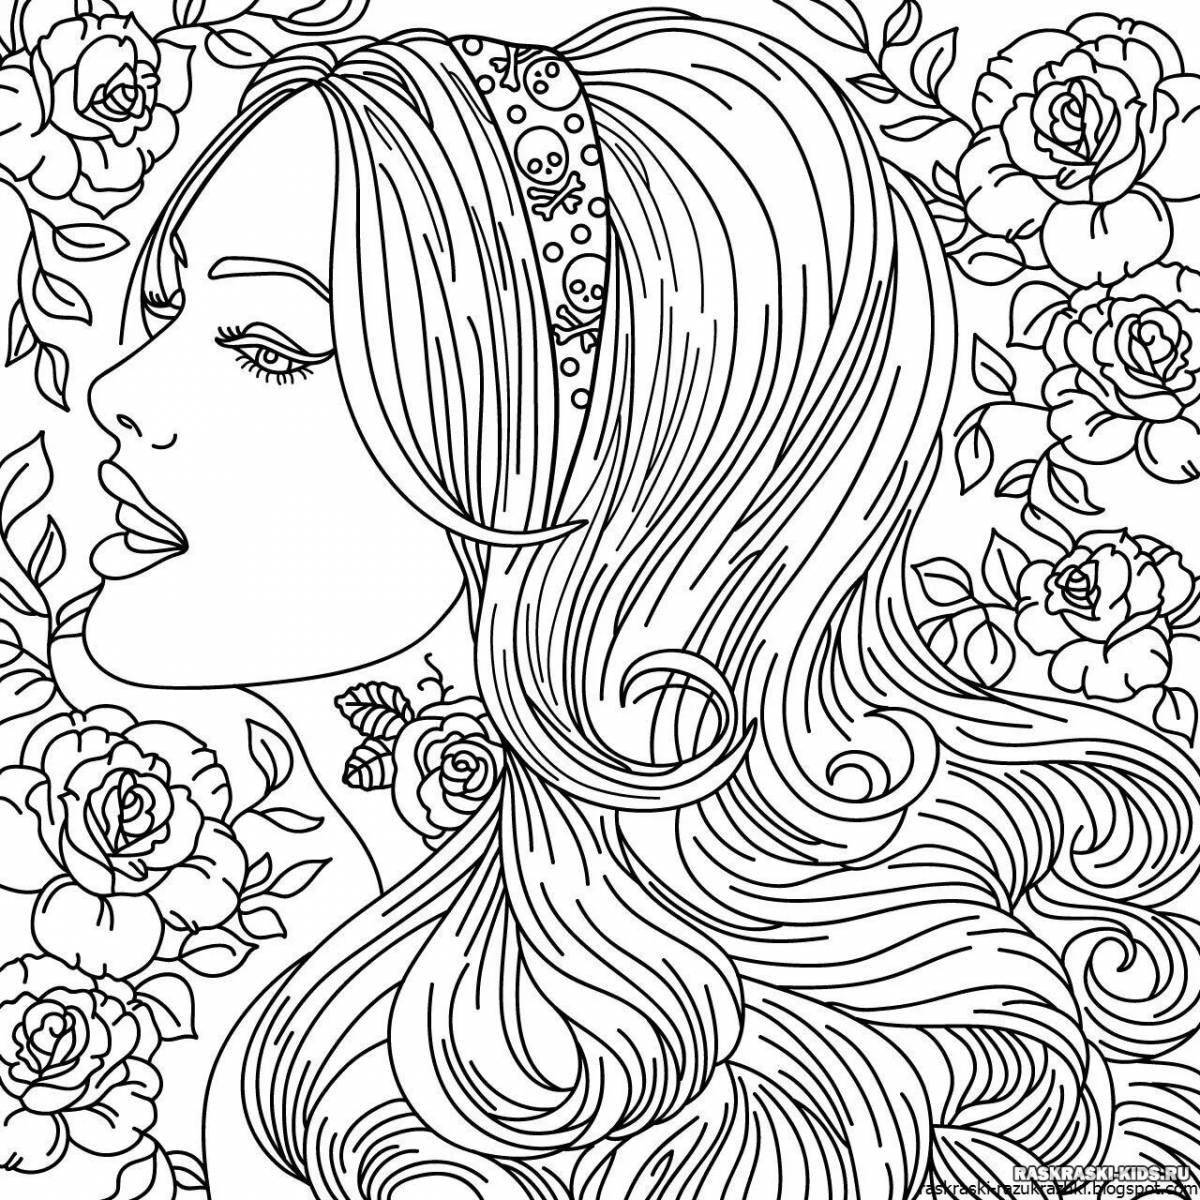 Creative coloring book for 12 year old girls